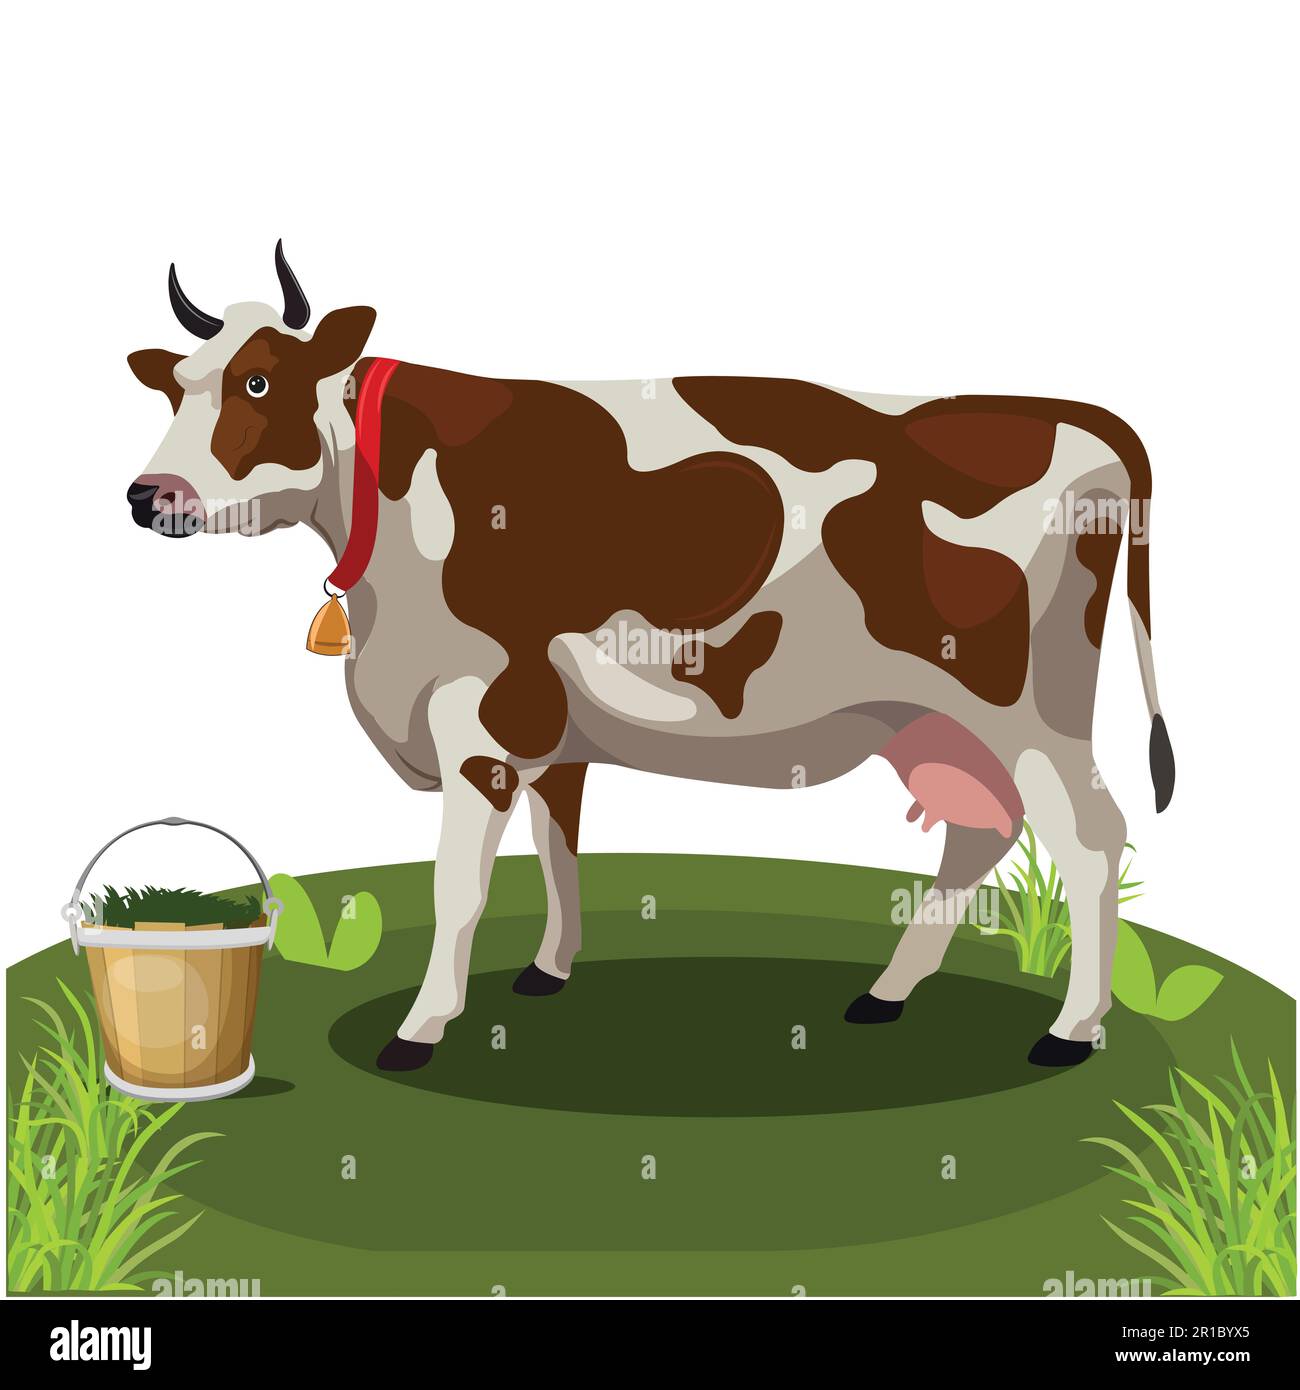 Cute Cartoon cow standing on the grass. Vector image of Cow on white background. Isolate the image from background and use for children alphabet kearn Stock Vector